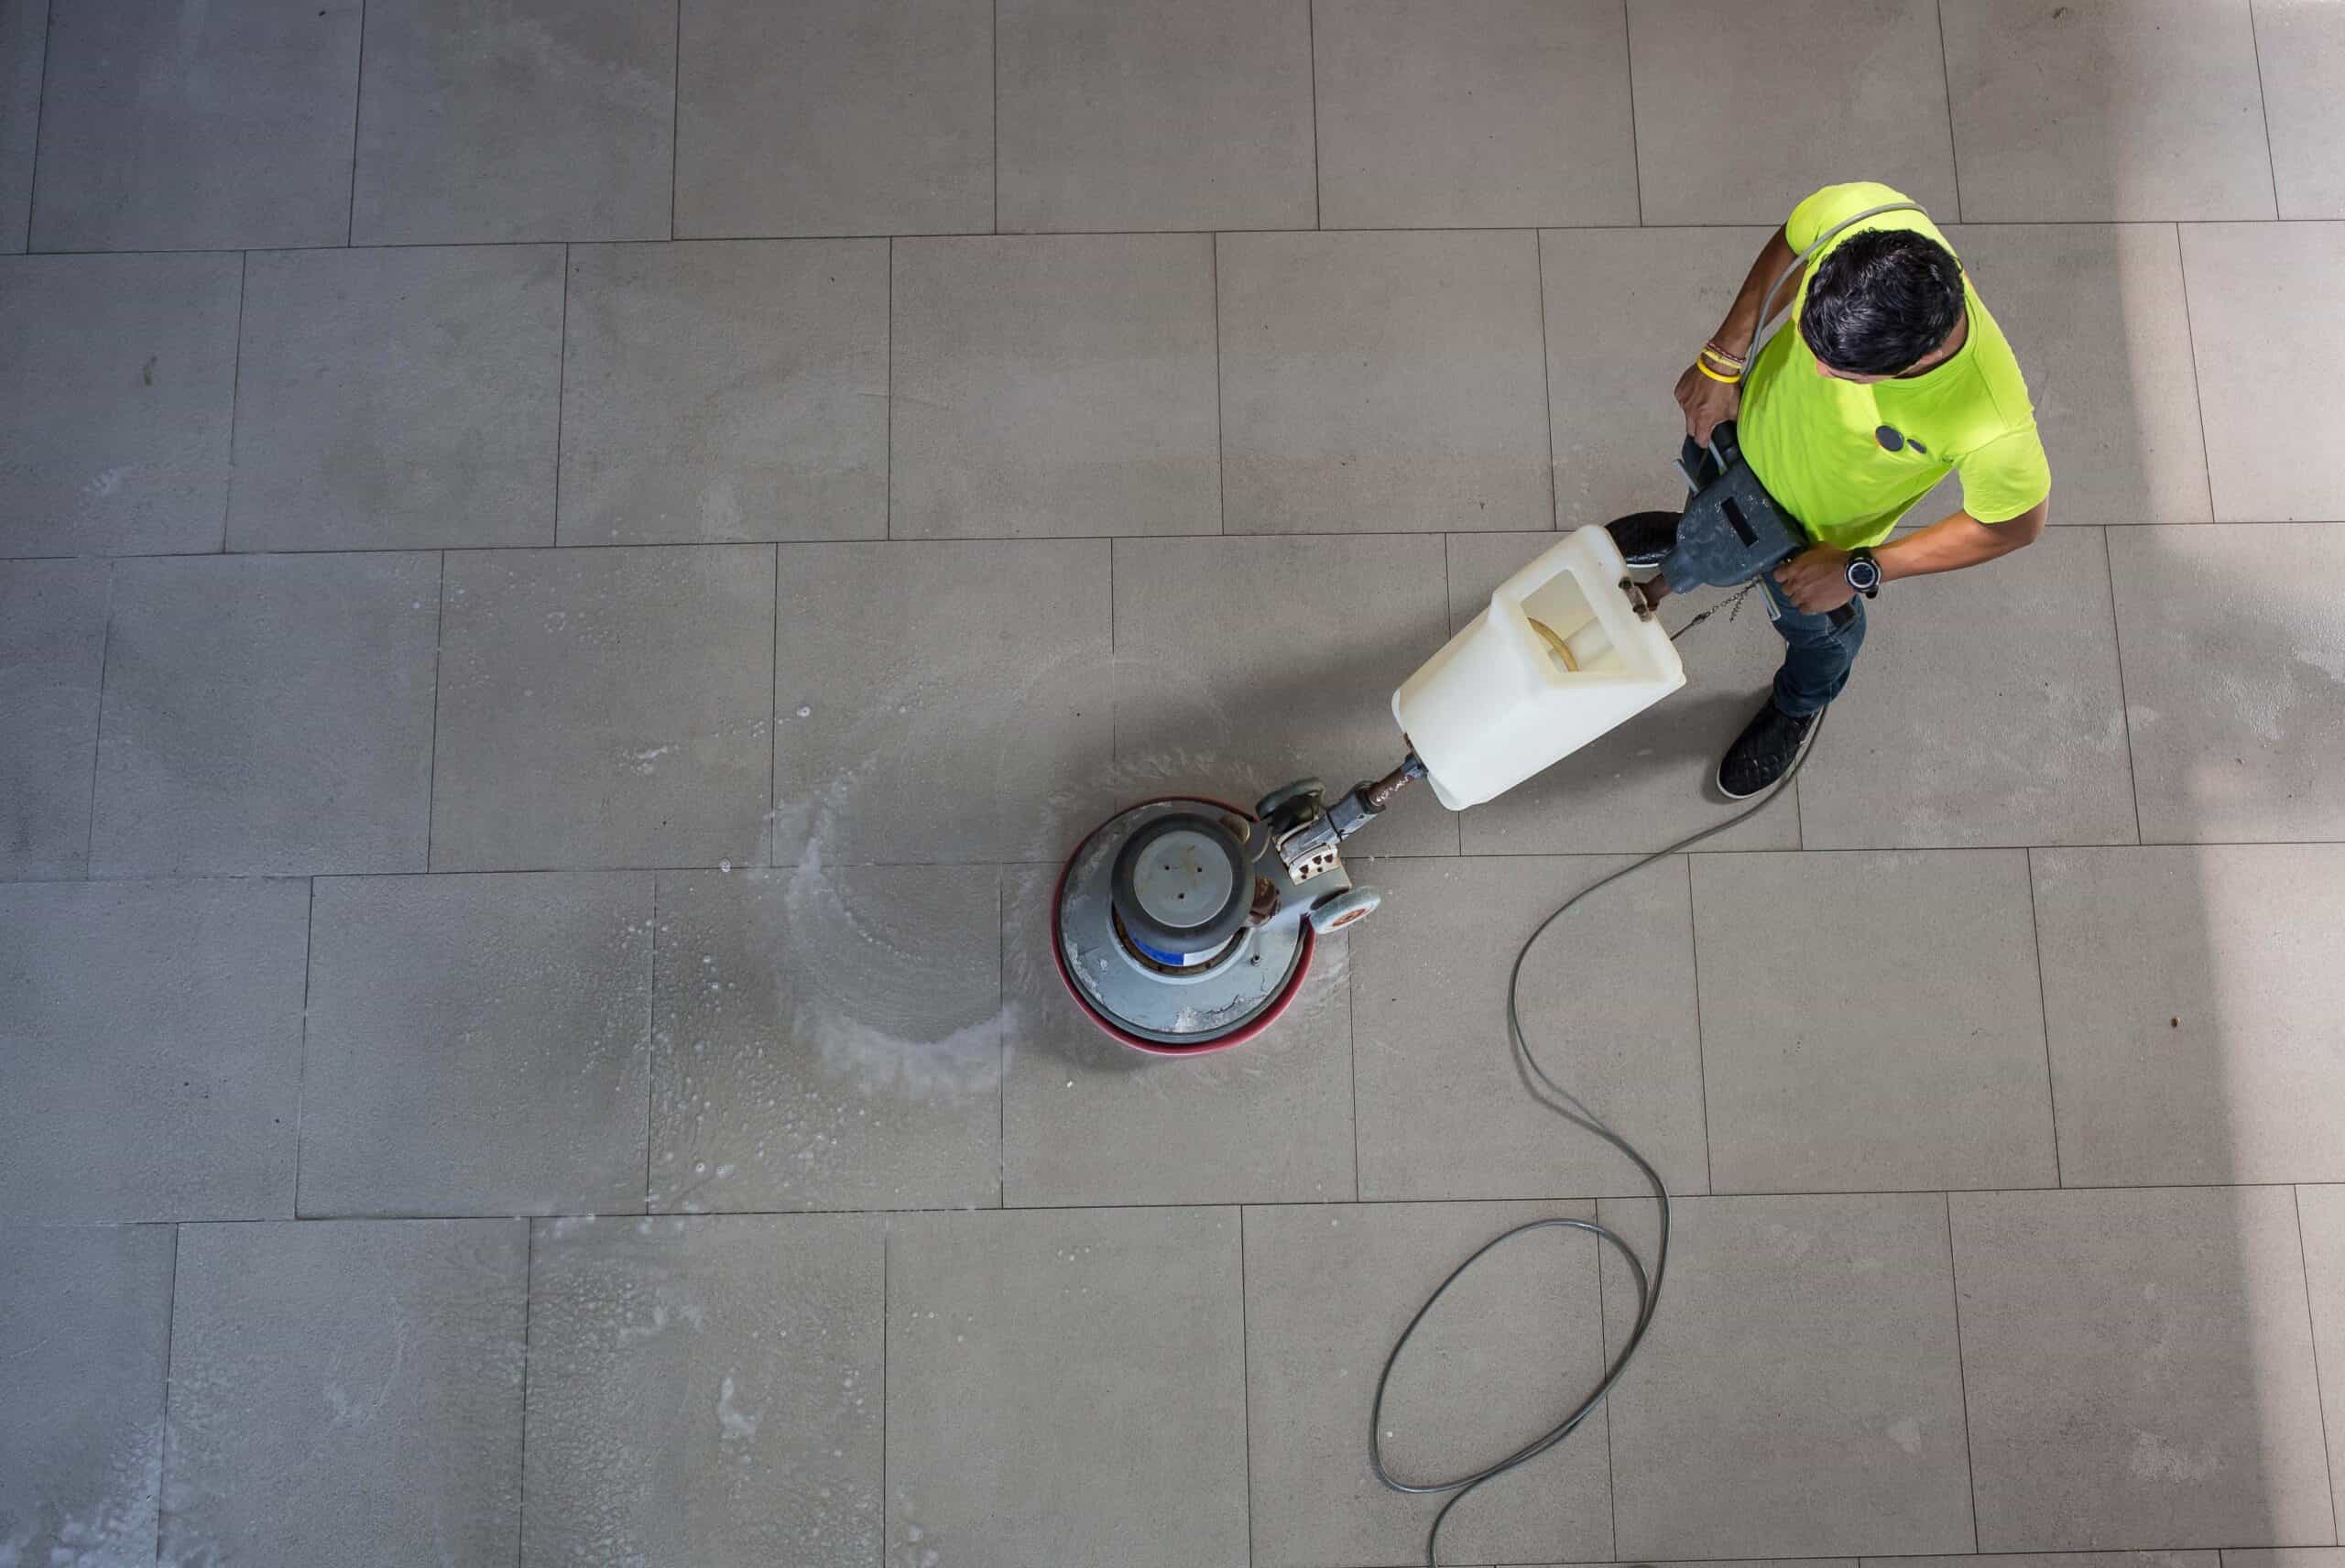 A man cleaning the floor using a cleaning machine